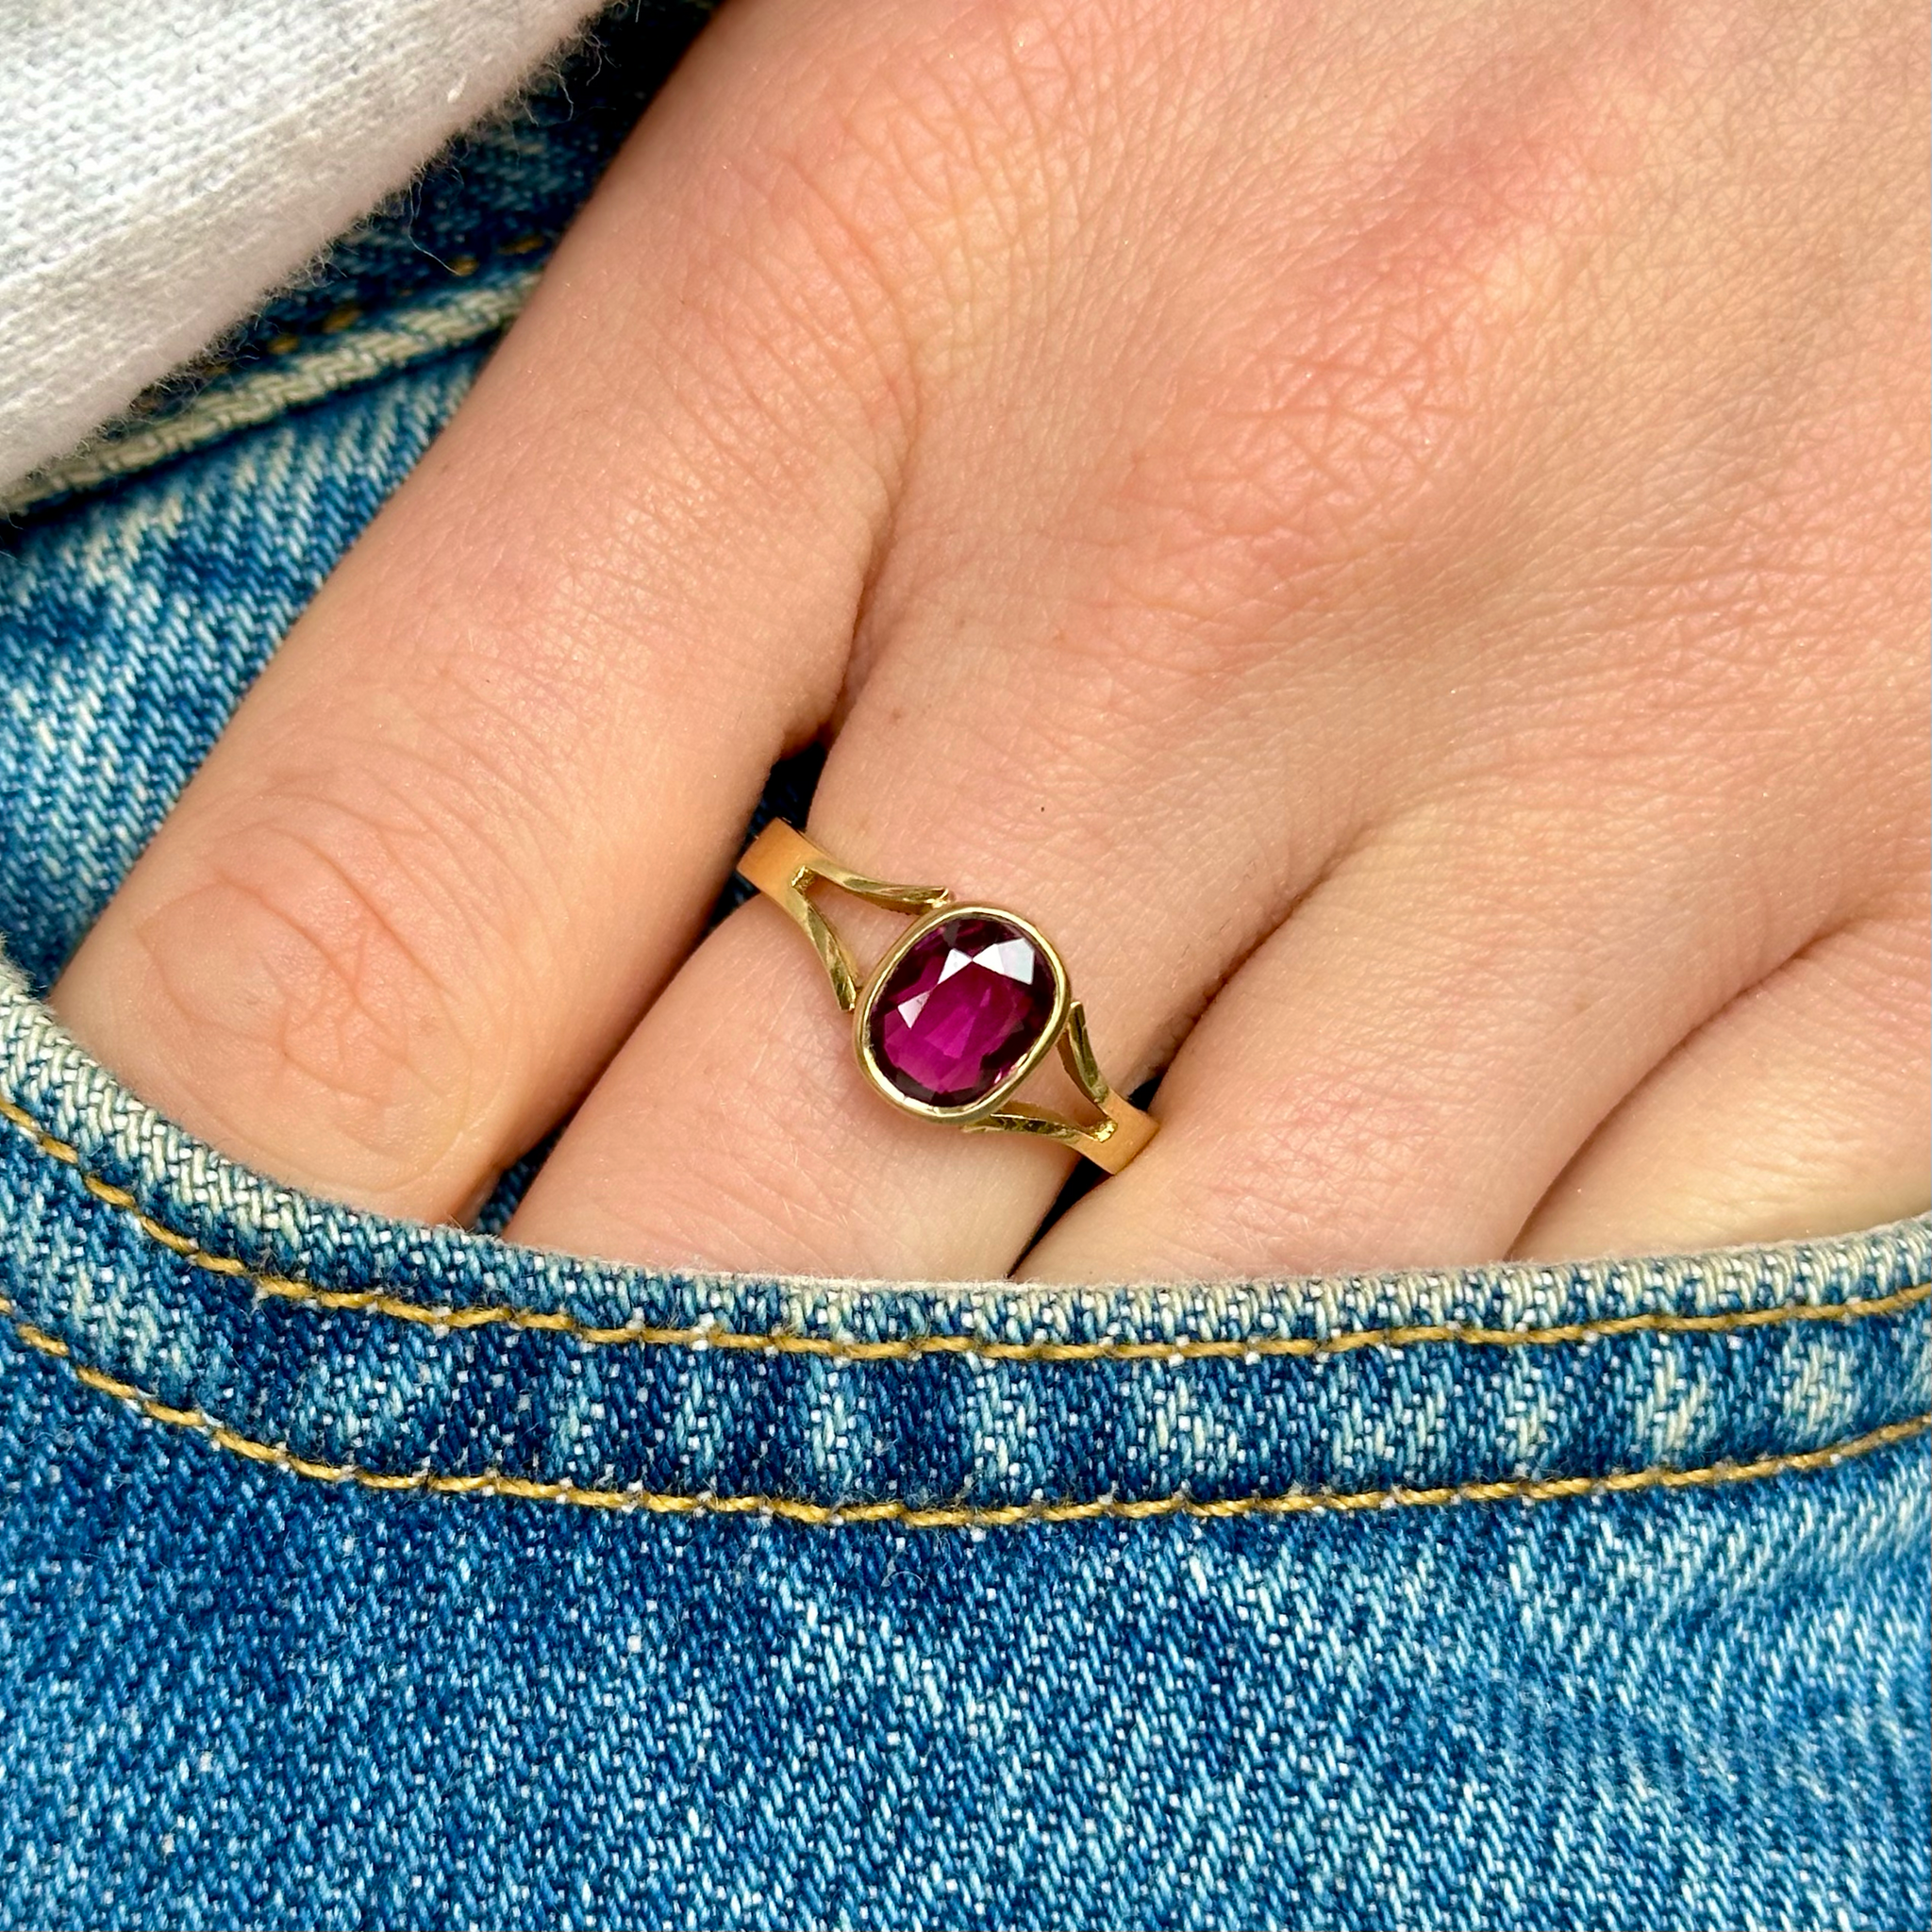 Vintage single stone ruby ring worn on hand in jeans